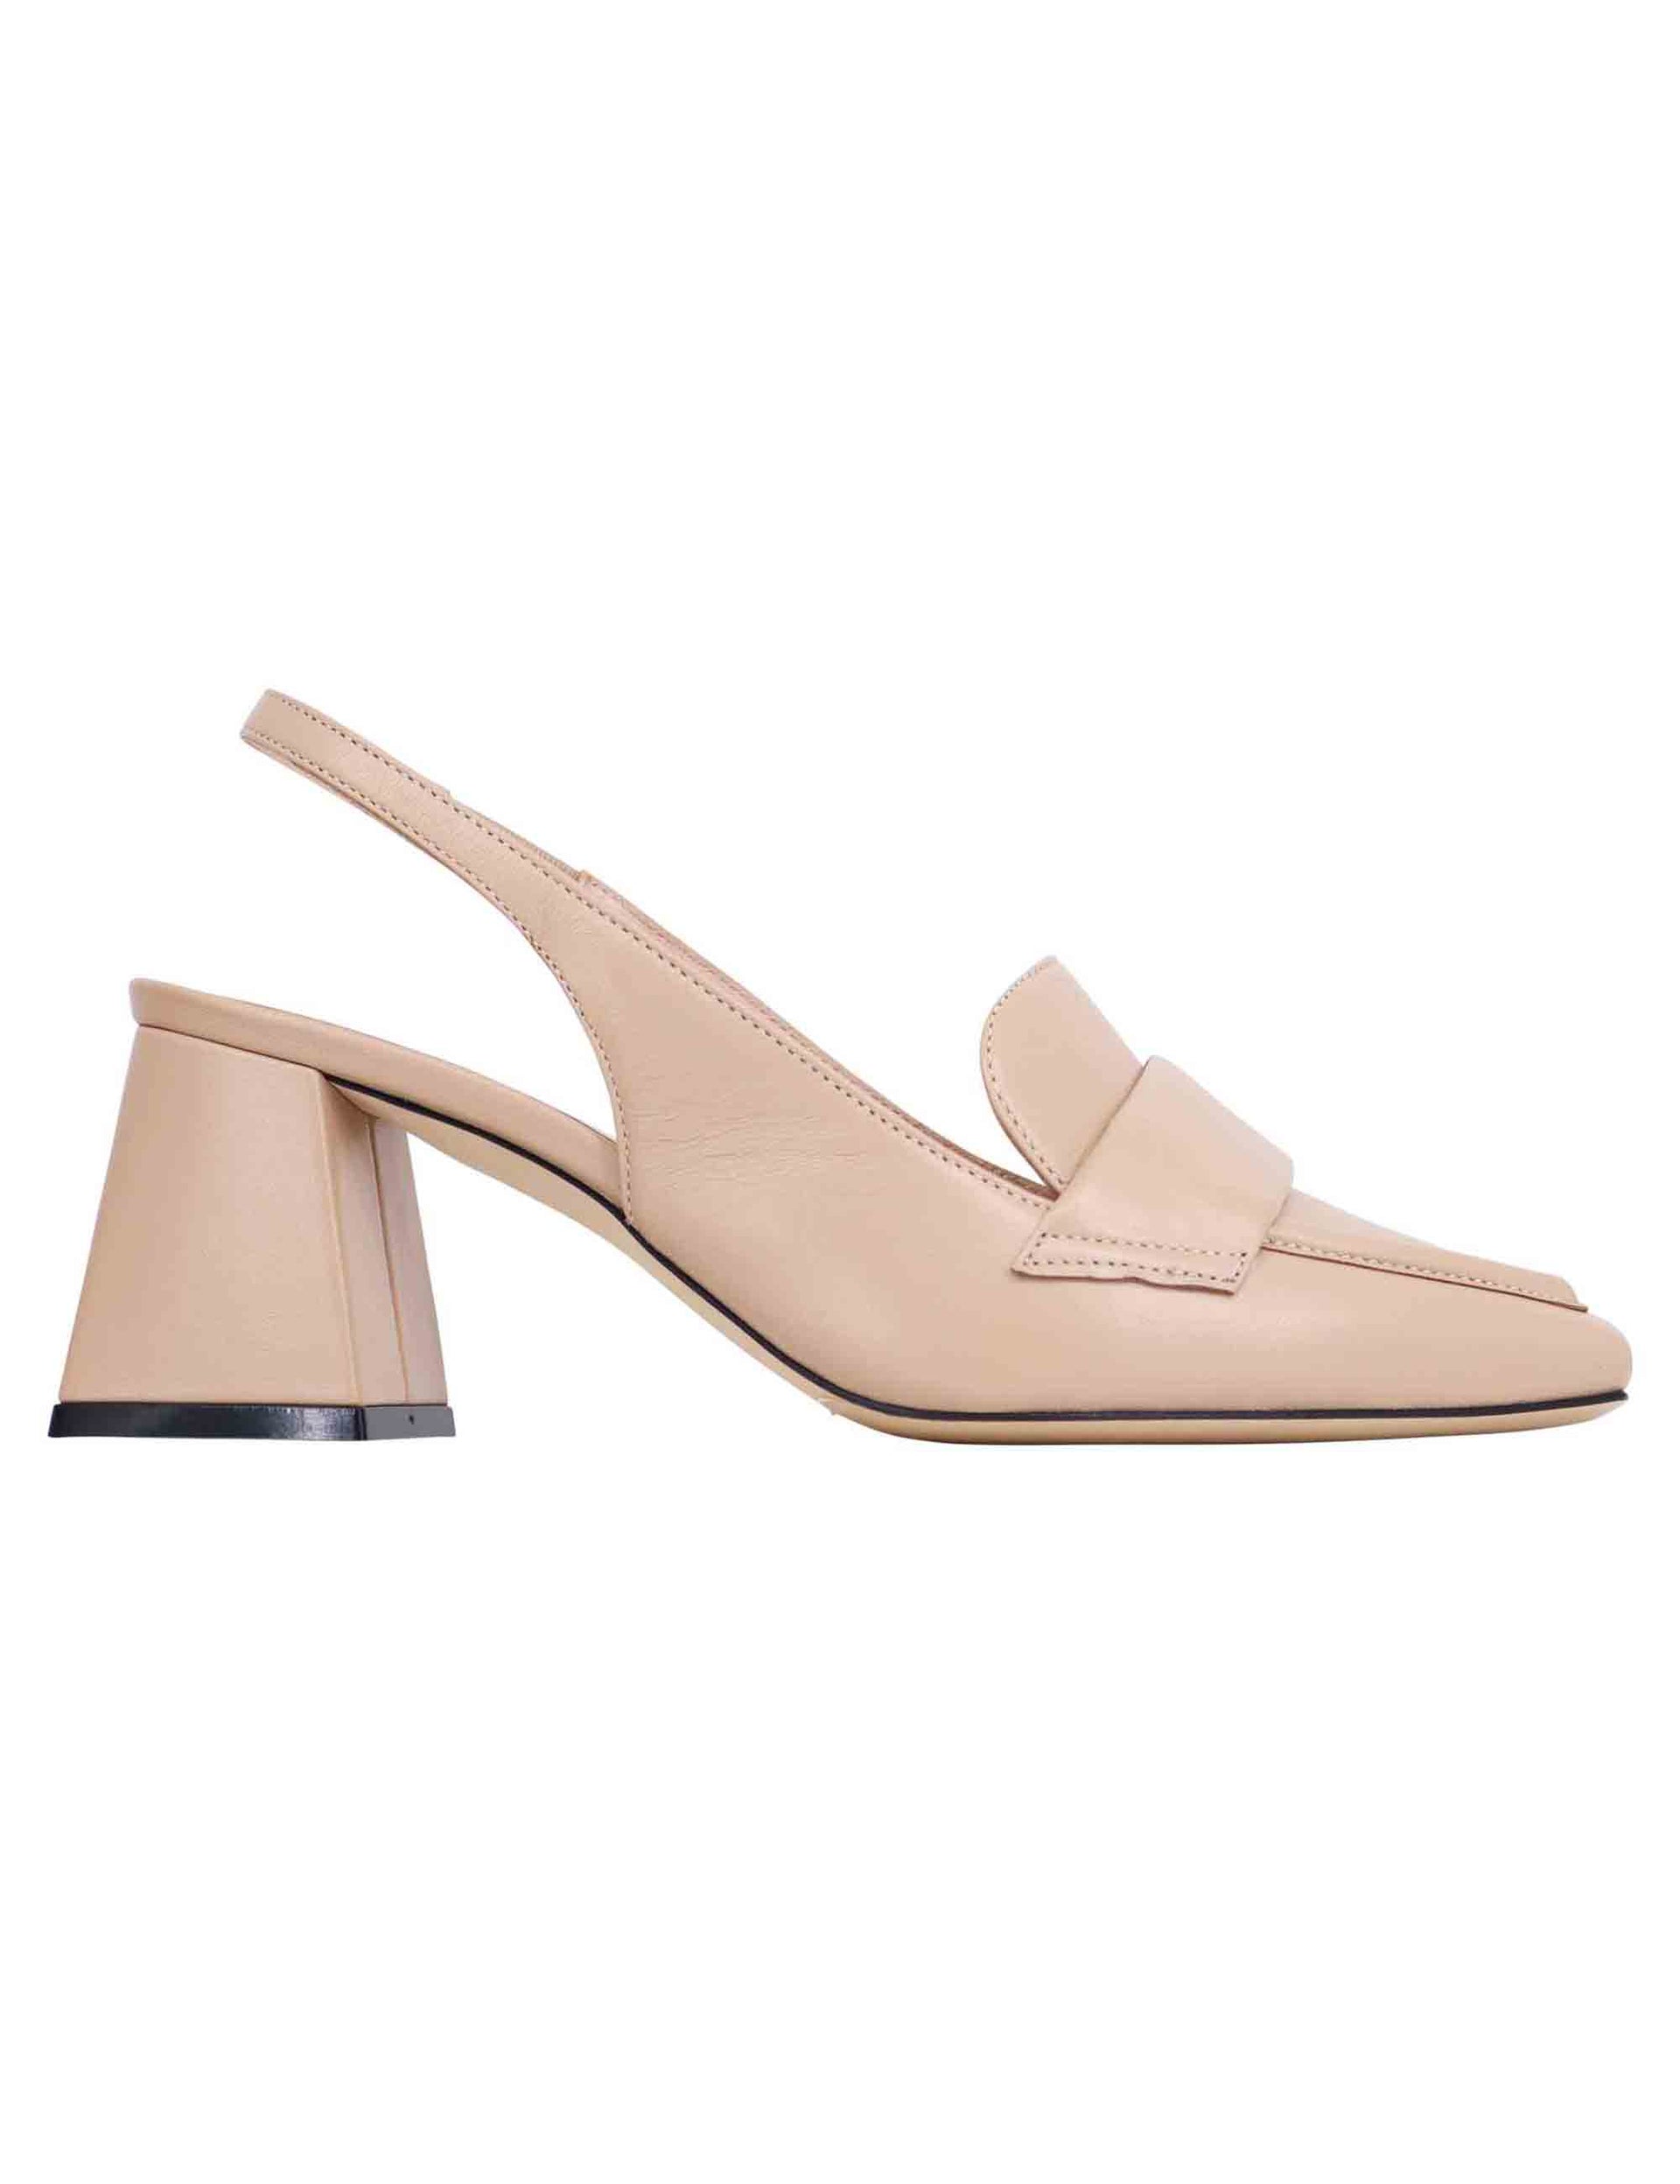 Women's slingback pumps in powder pink leather with square toe